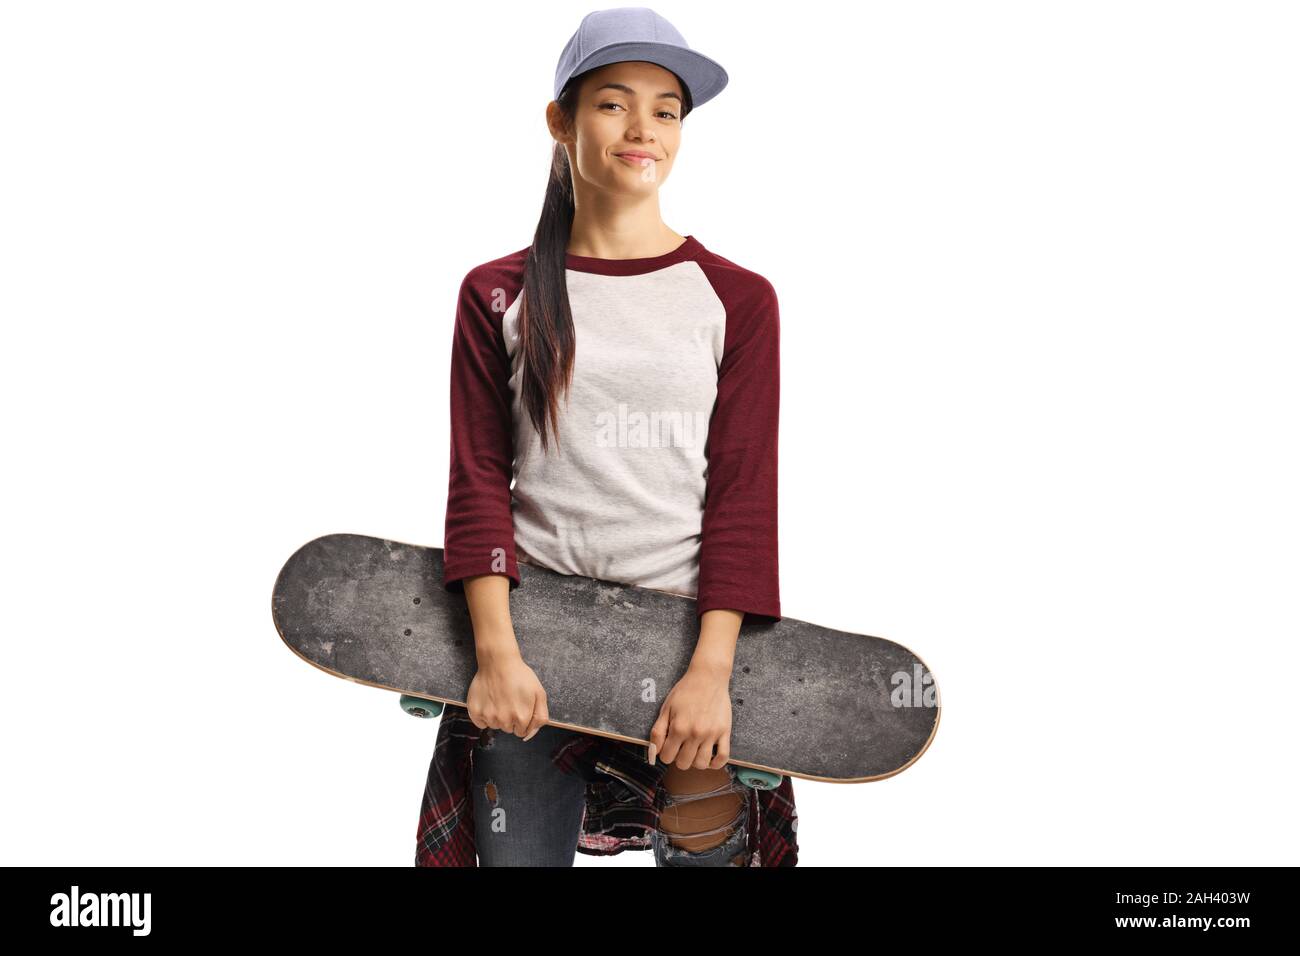 Skater girl holding a skateboard and smiling isolé sur fond blanc Banque D'Images